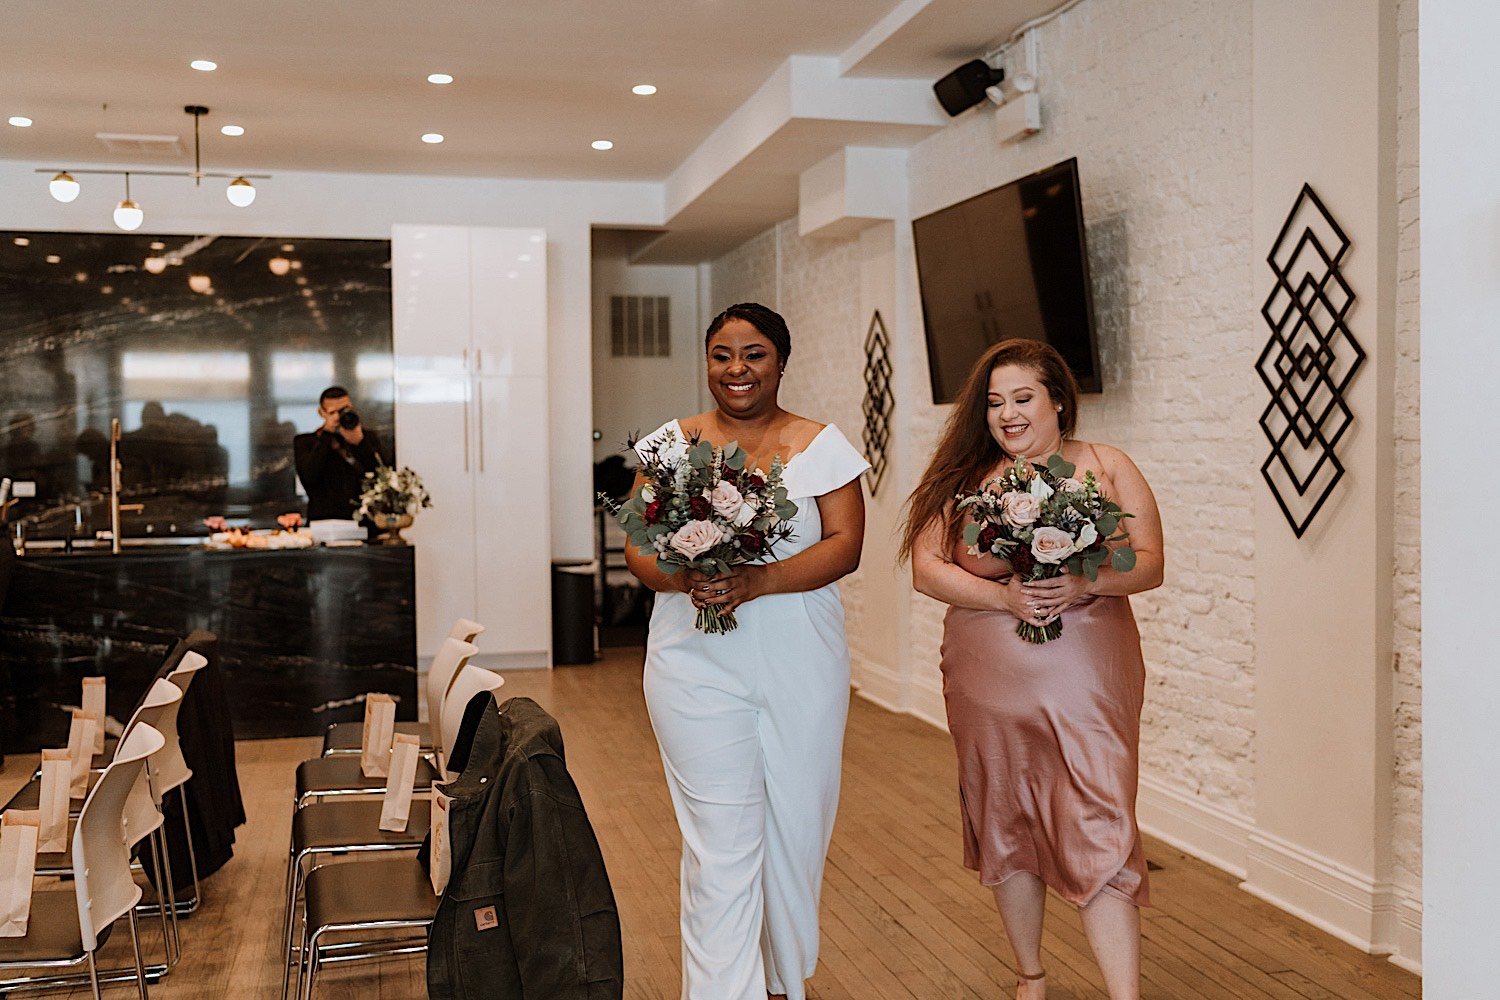 Brides walking down the aisle together of their Humboldt Park wedding holding flowers